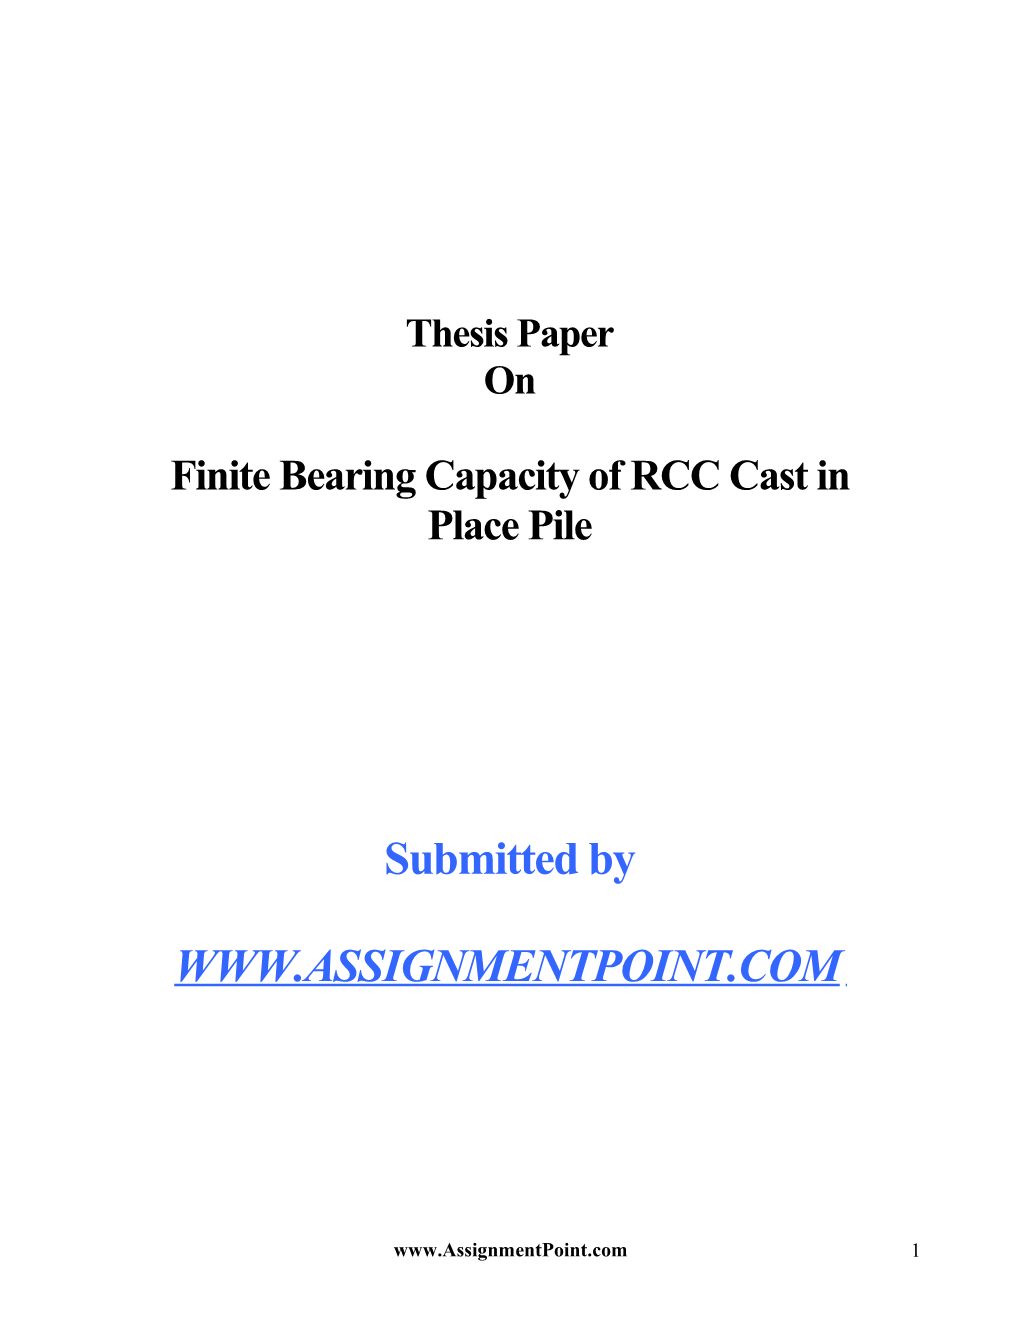 Finite Bearing Capacity of RCC Cast in Place Pile